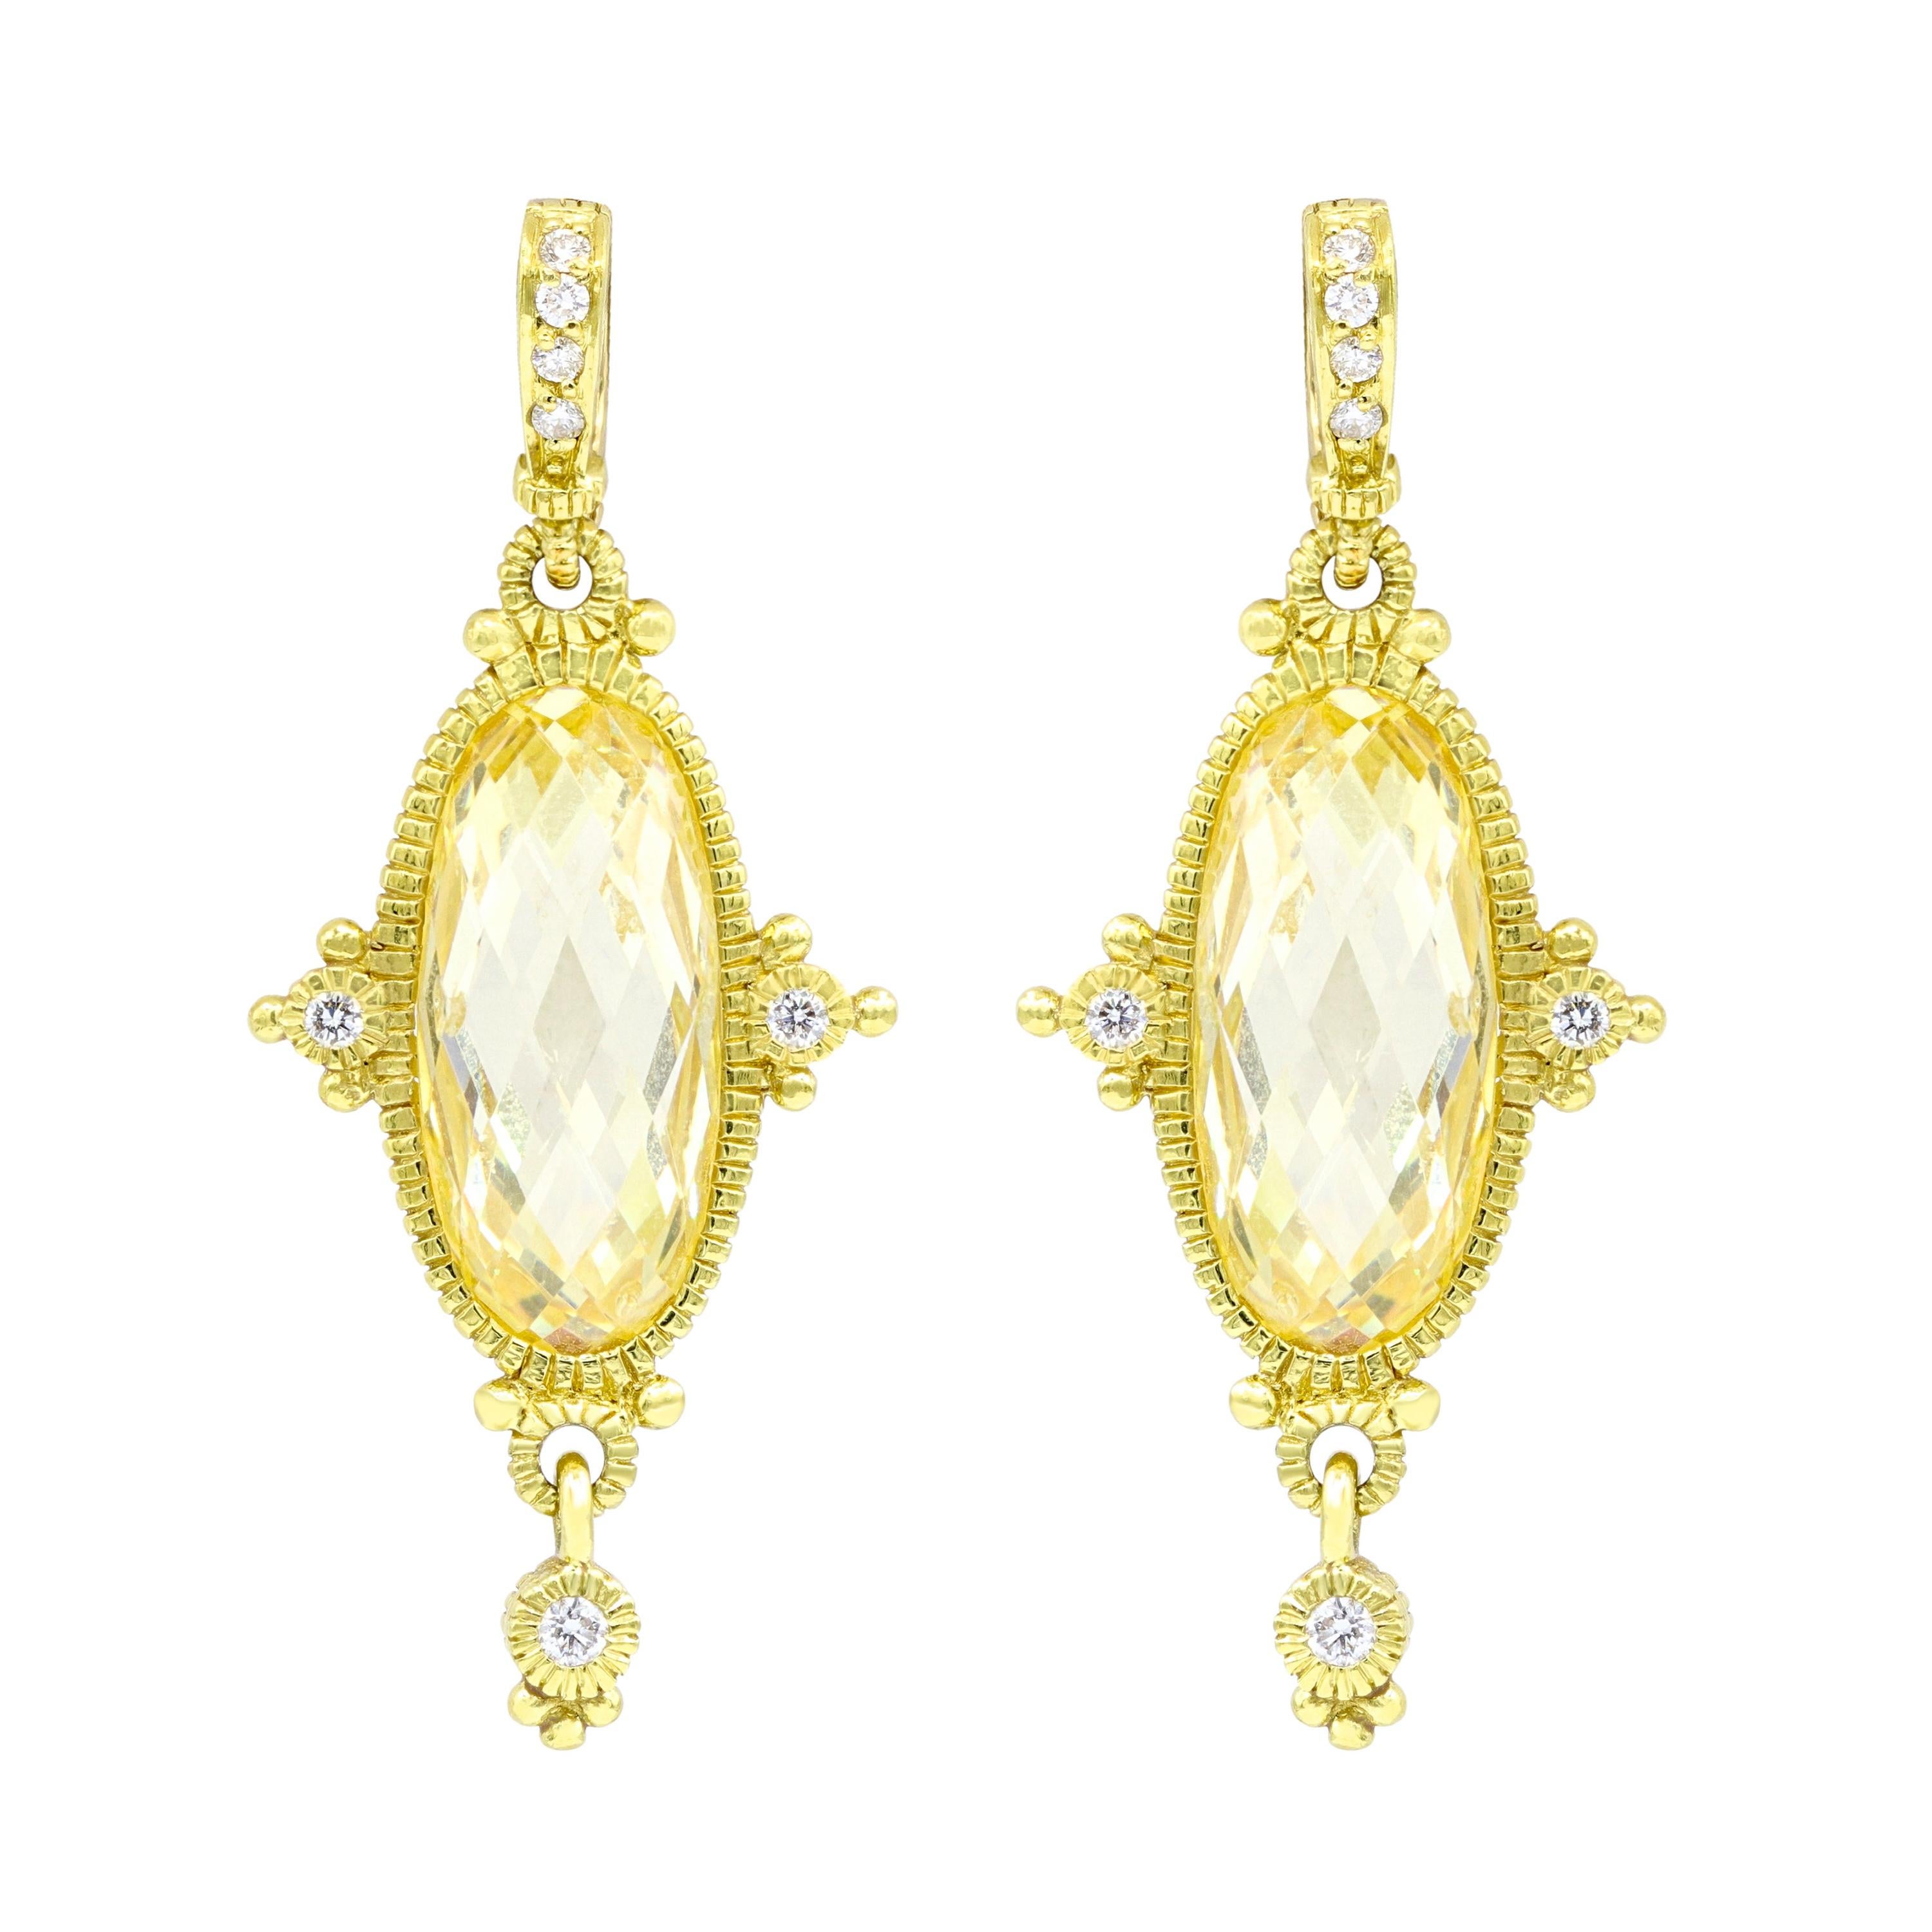 Diana M. 18KT Yellow Gold Earring with 20.00ct Oval Citrine and 0.75ct Diamonds